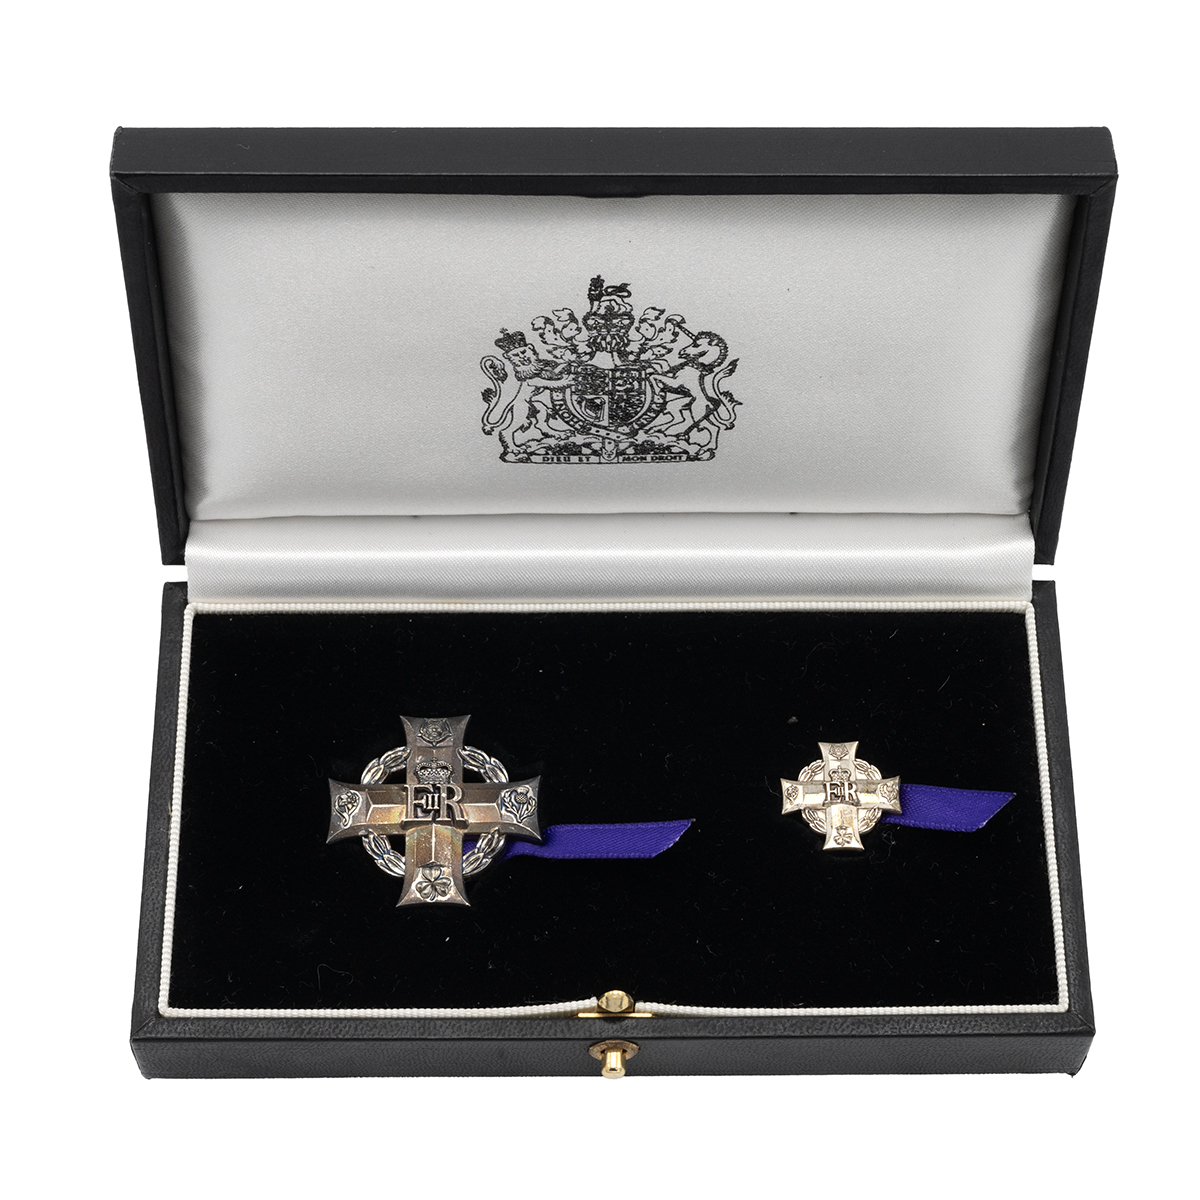 Elizabeth Cross. Awarded in memory of 22783273 Corporal Murray Sinclair Peterson of the Royal Eng... - Image 2 of 2